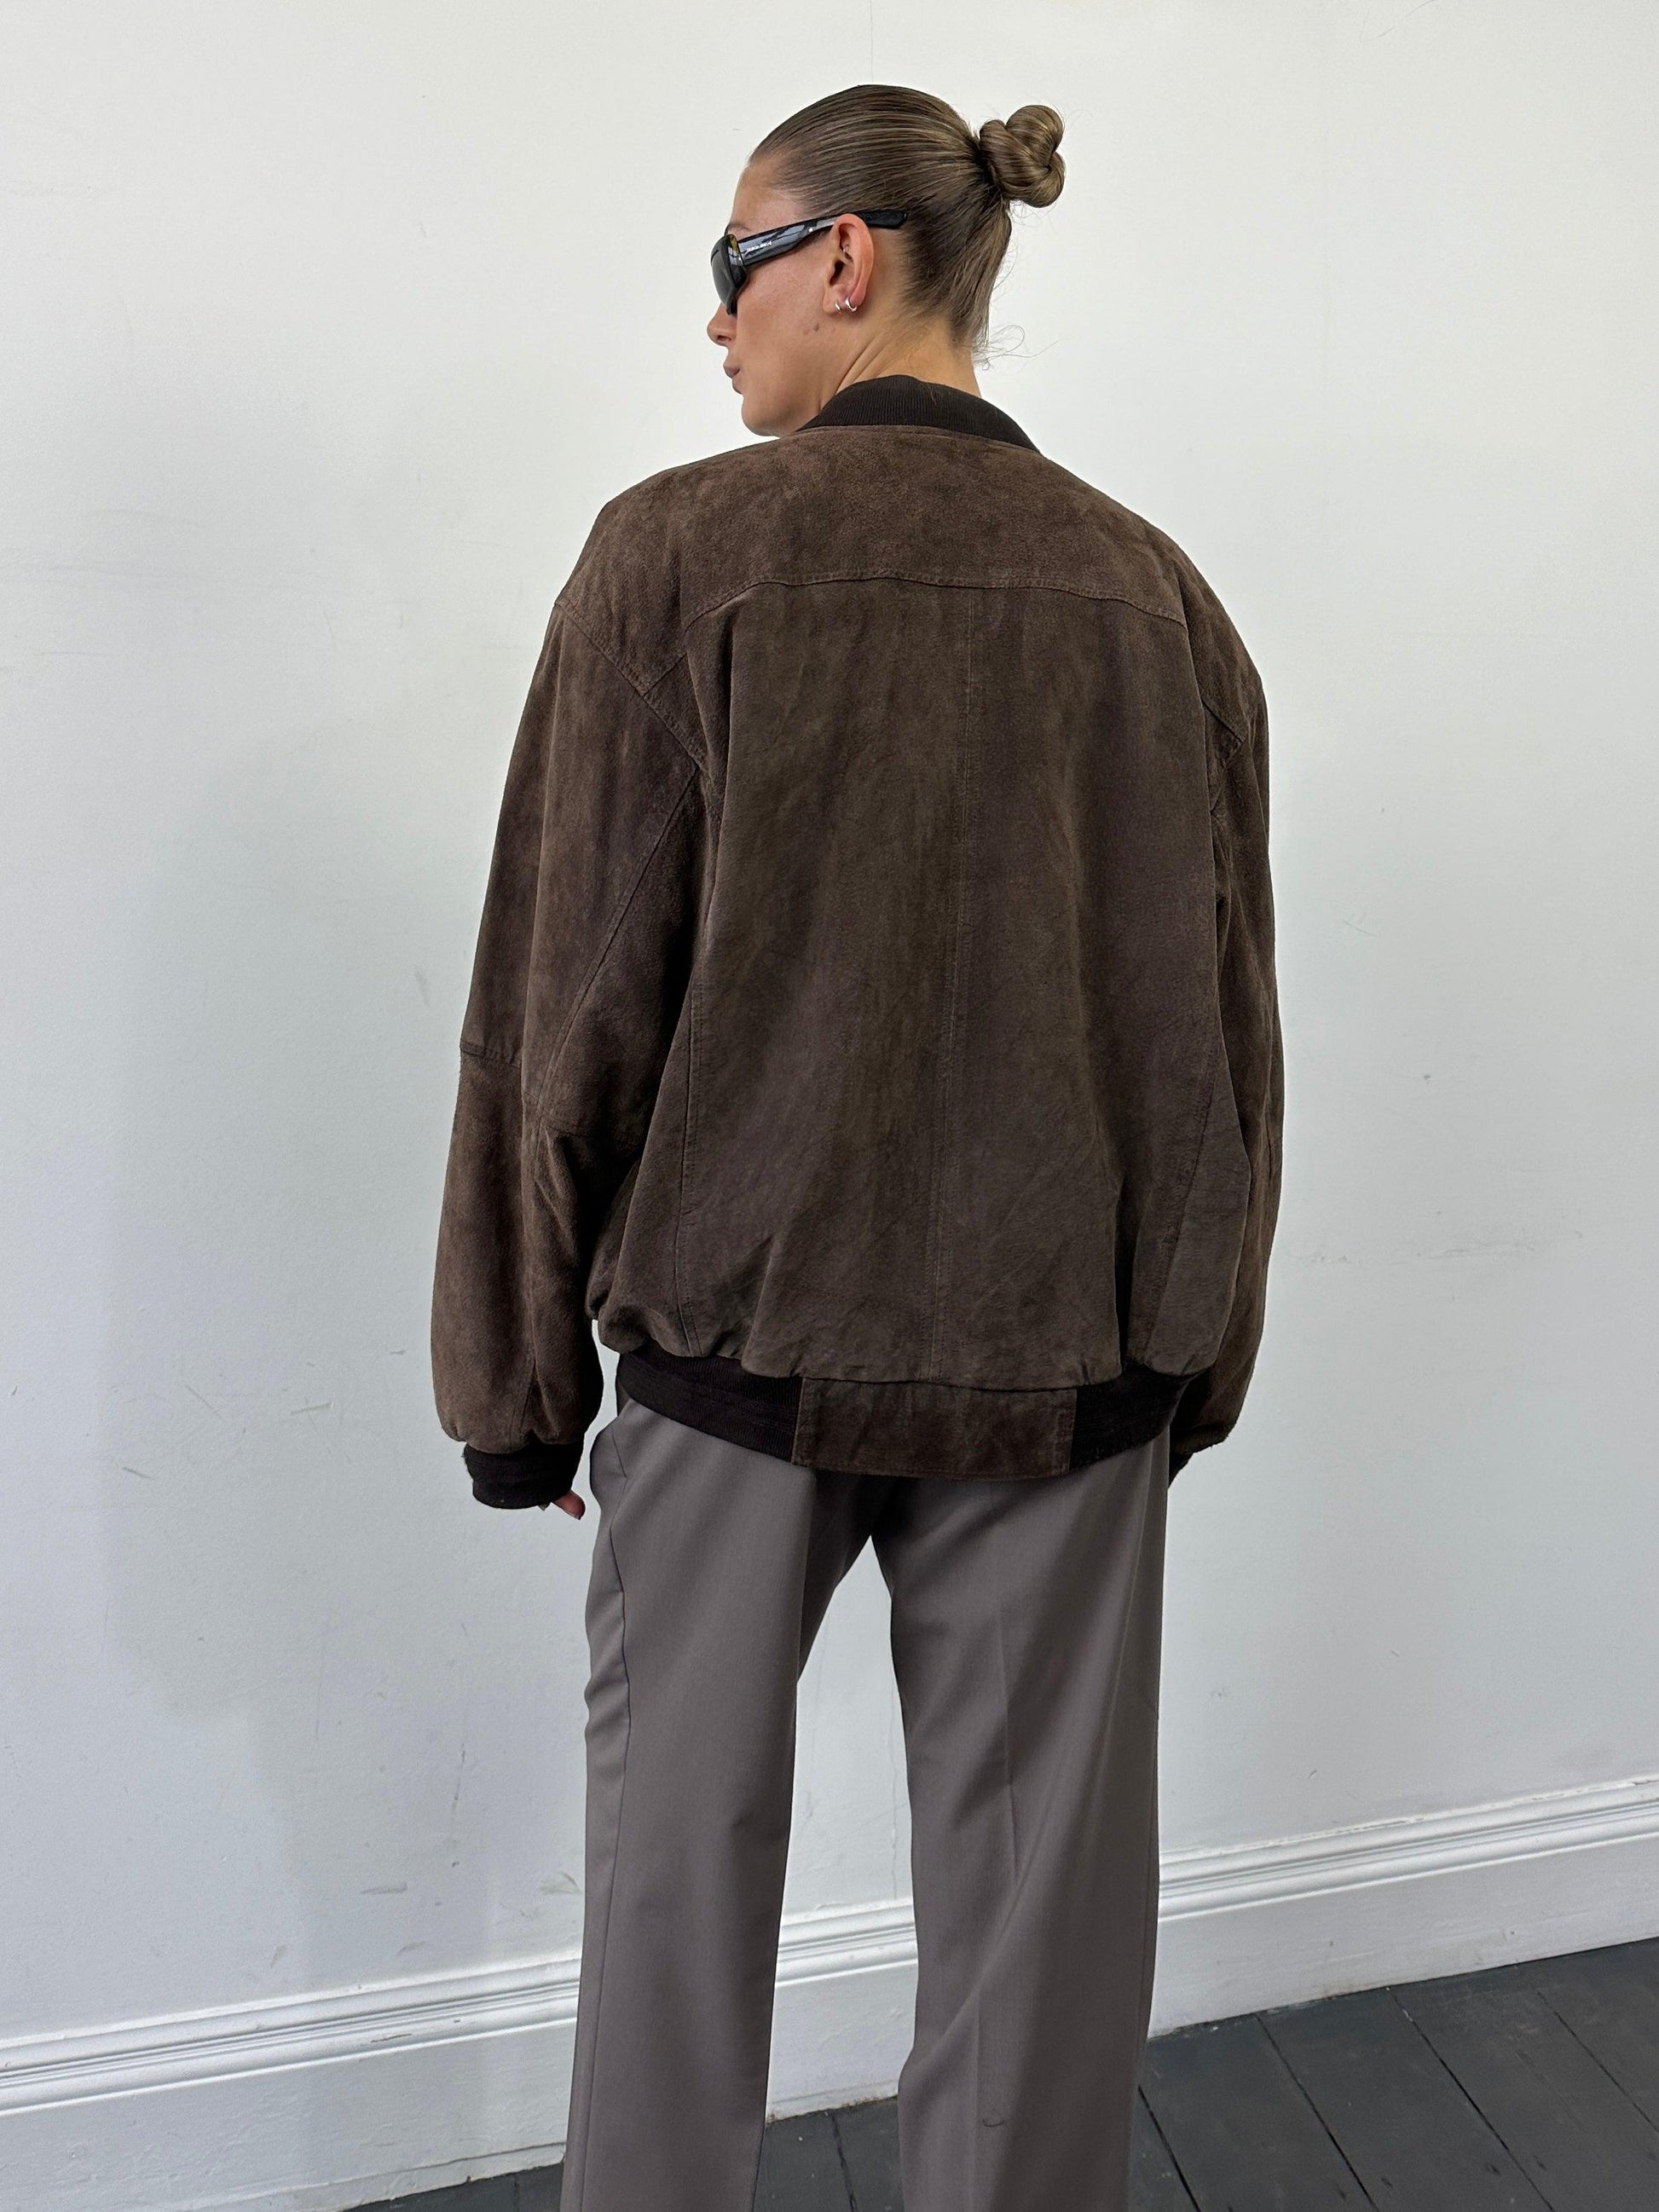 Vintage Suede Leather Bomber Jacket - XL - Known Source